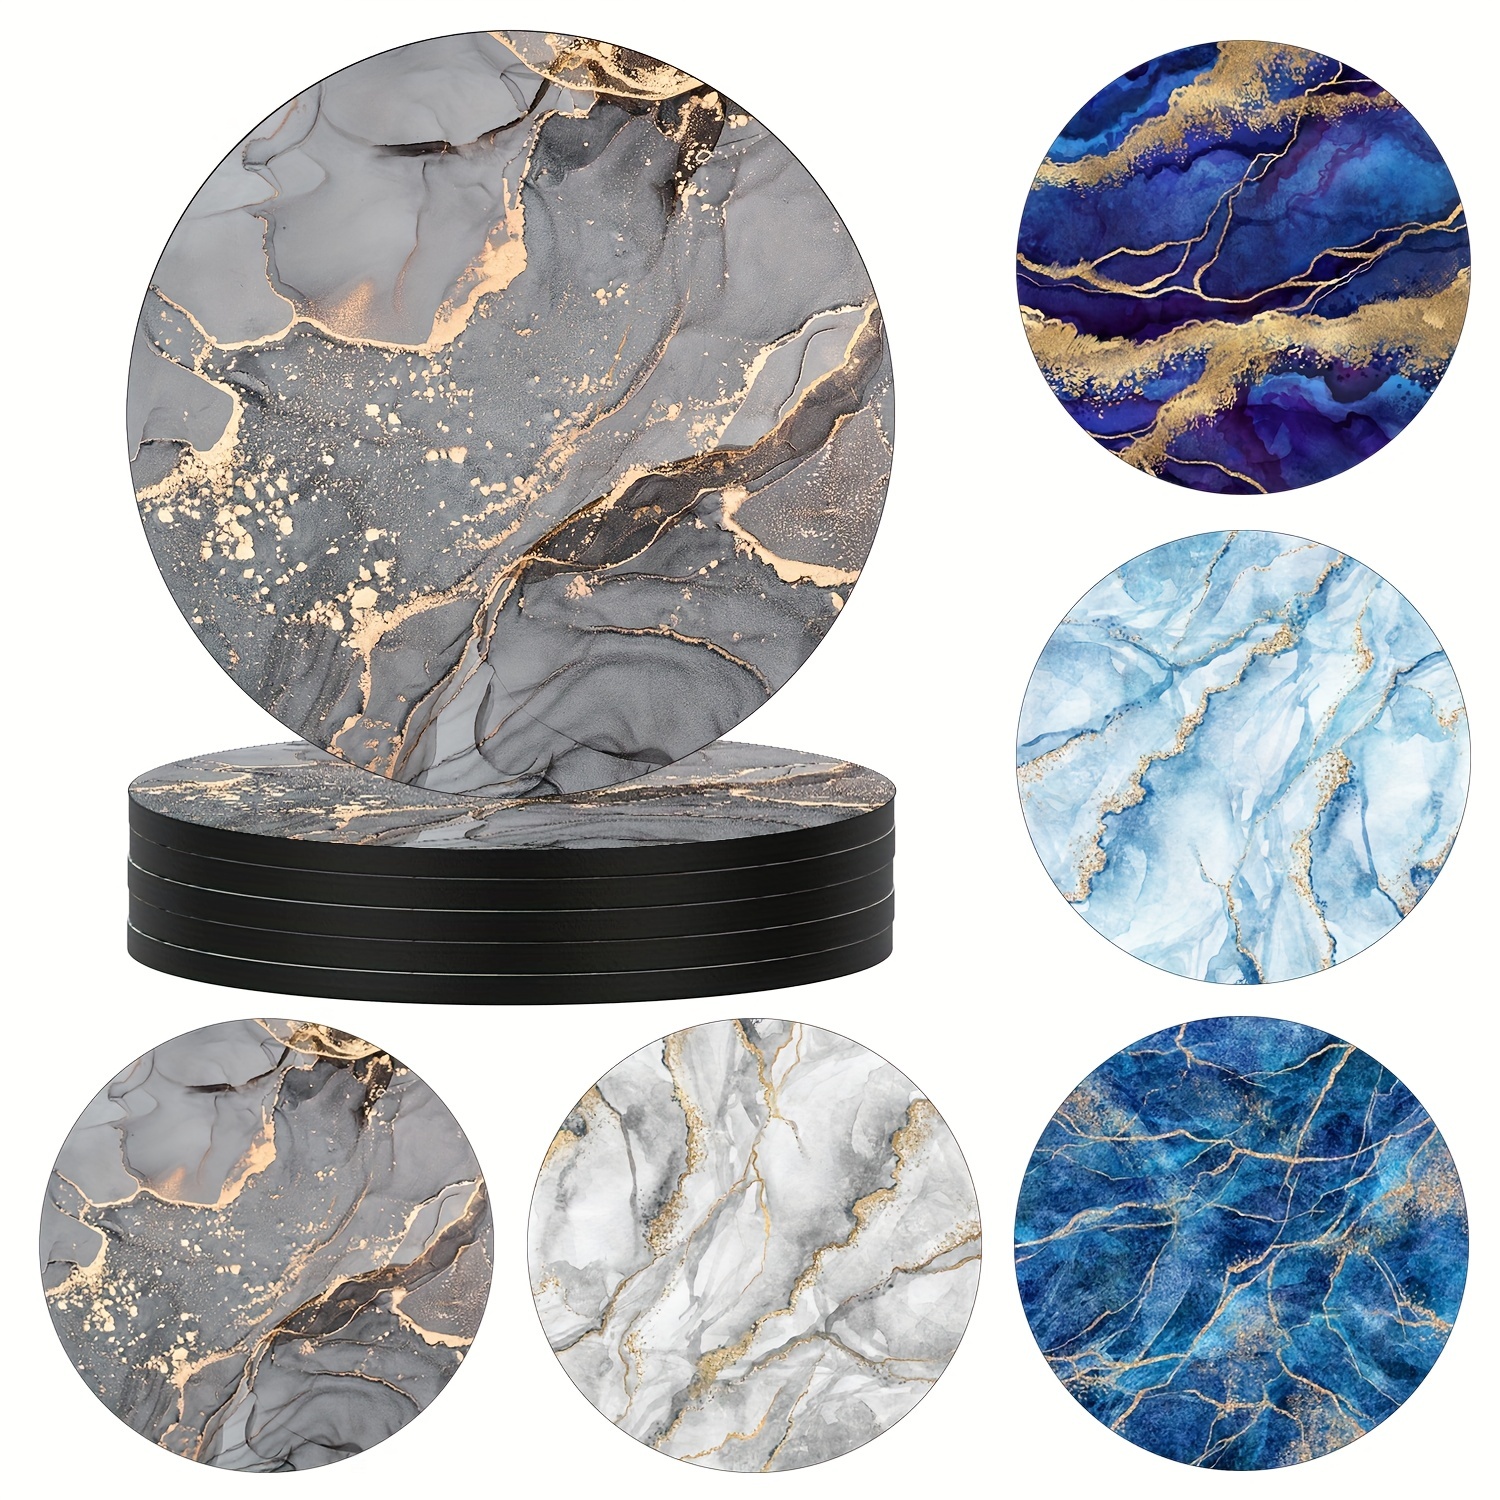 

Set Of 6 Watercolor Marbling Coasters For Drinks, 4" Round Absorbent Rubber Drink Coasters With Non-slip Backing, Cute Coasters For Cup Home Kitchen Table Decor Housewarming Gift